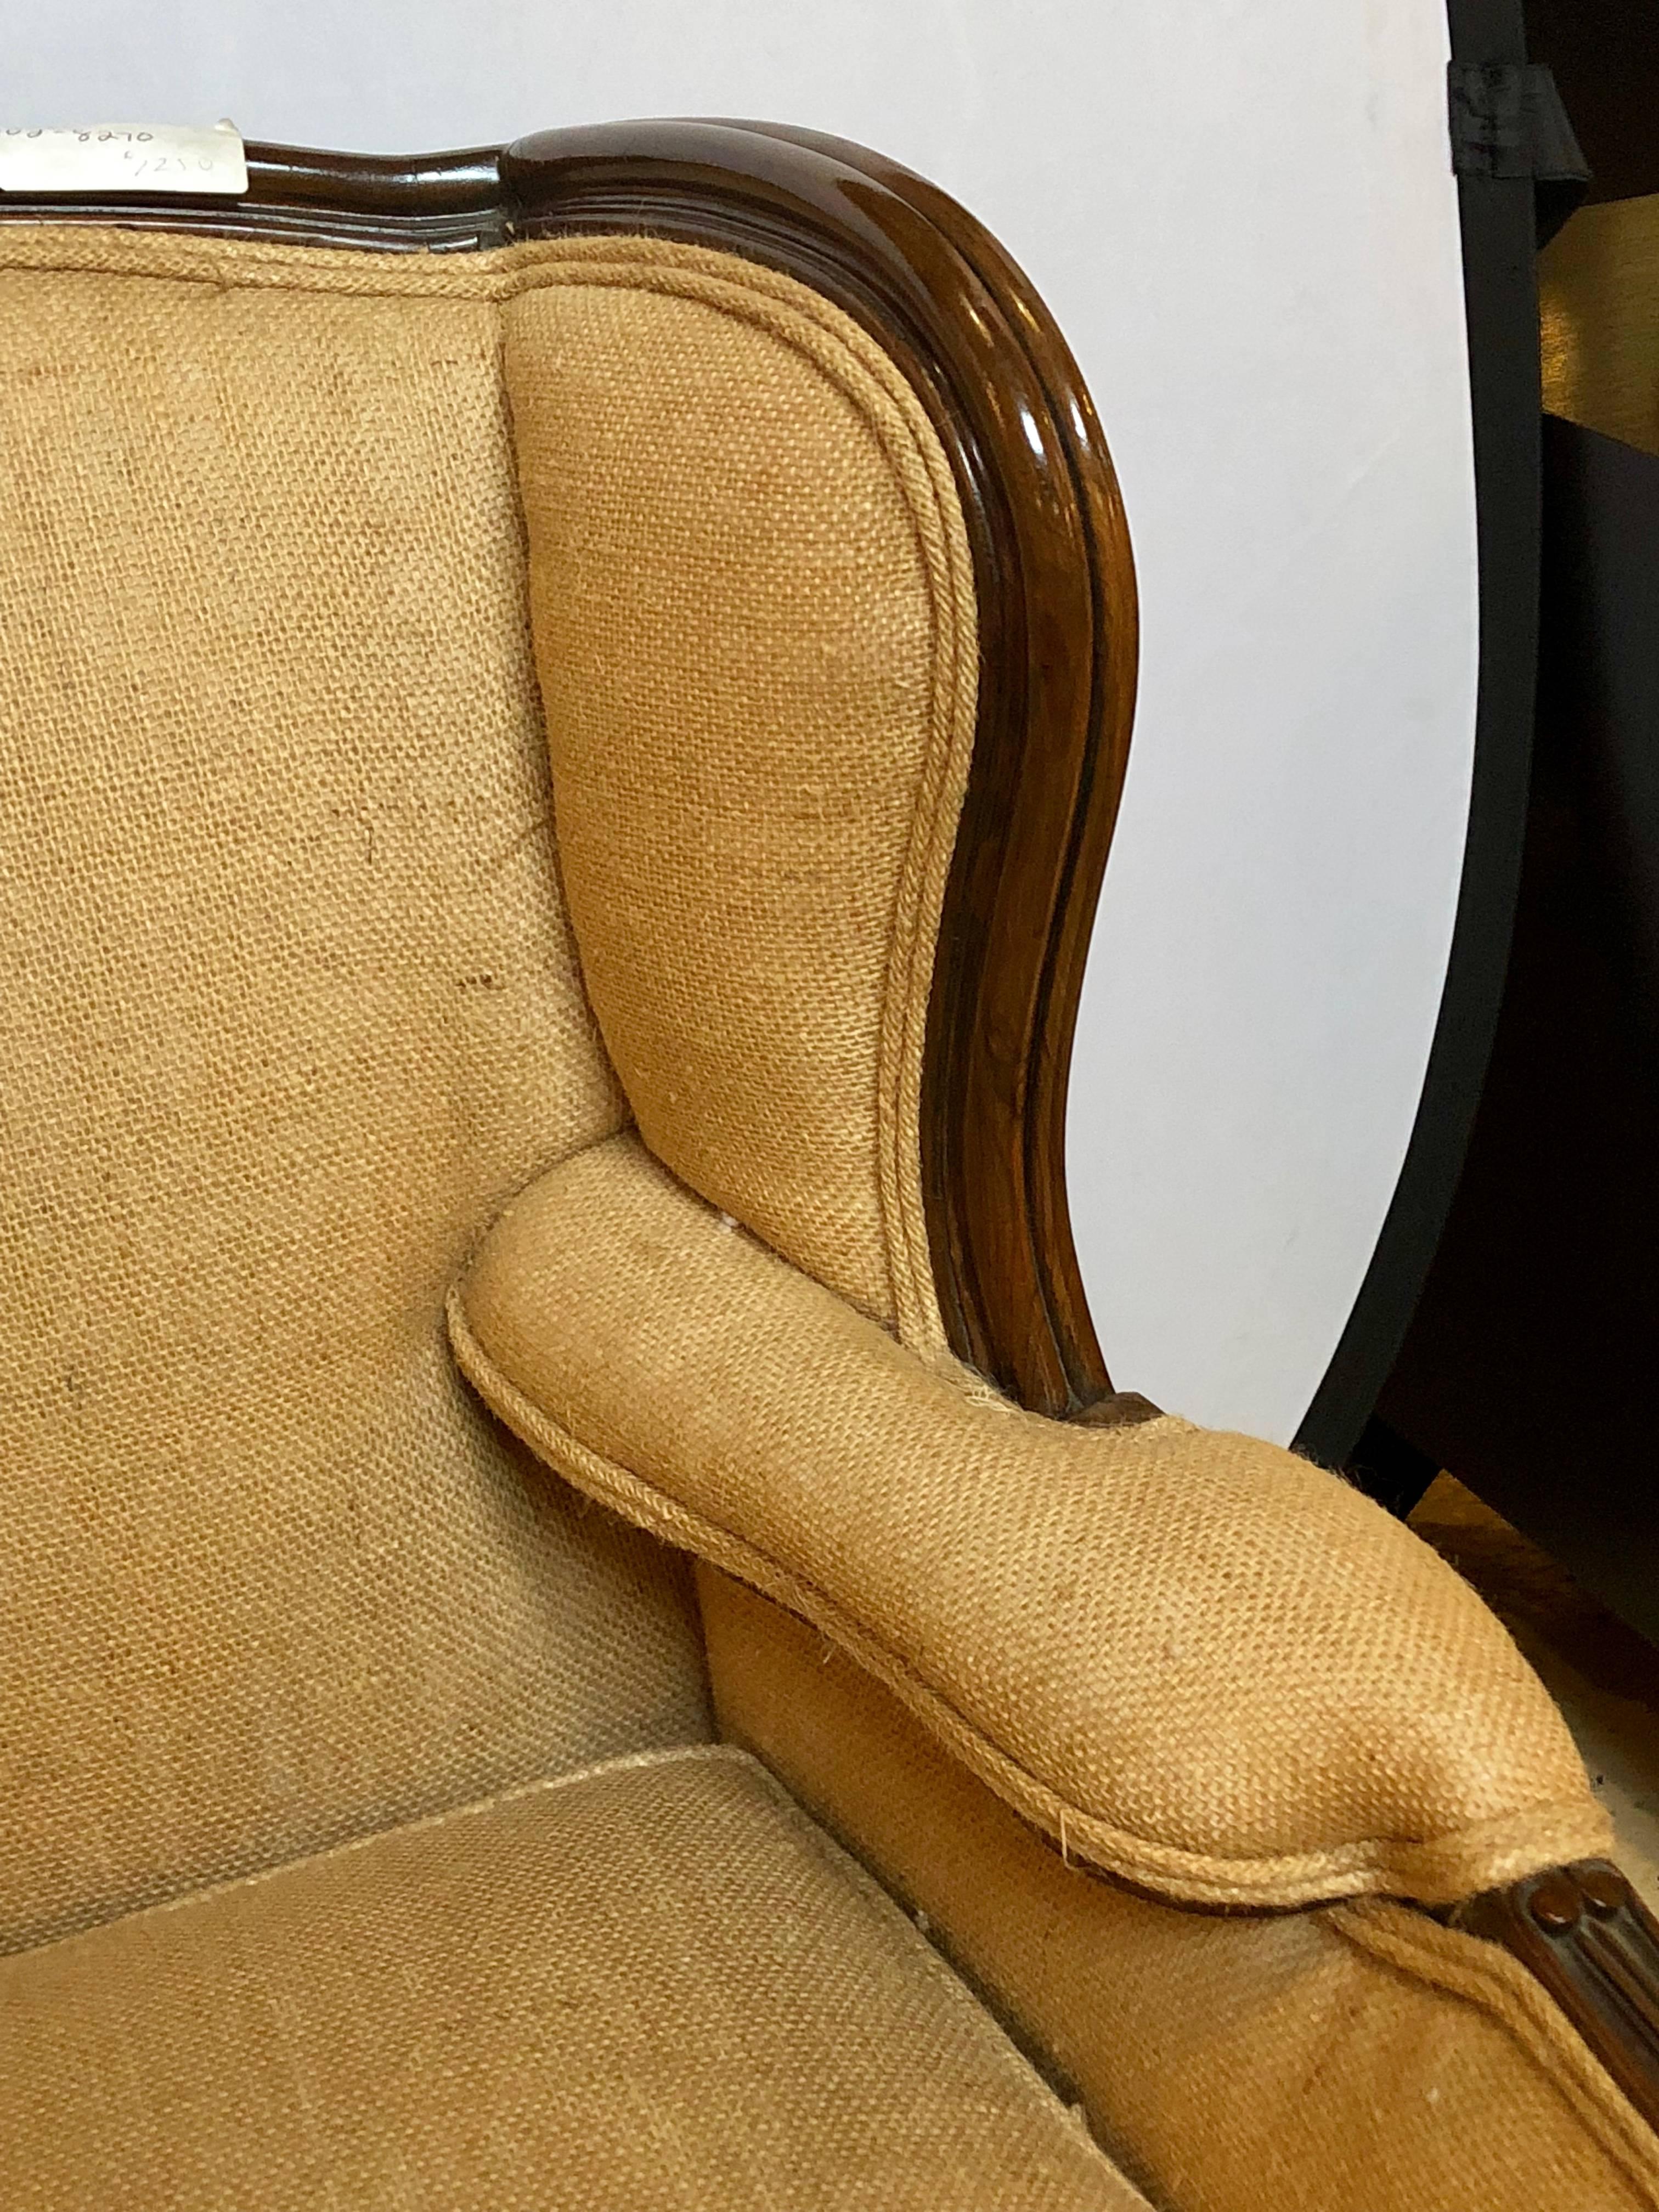 Oversized wingback chair upholstered in burlap carved wood details. Louis XV in style in a new fabric.